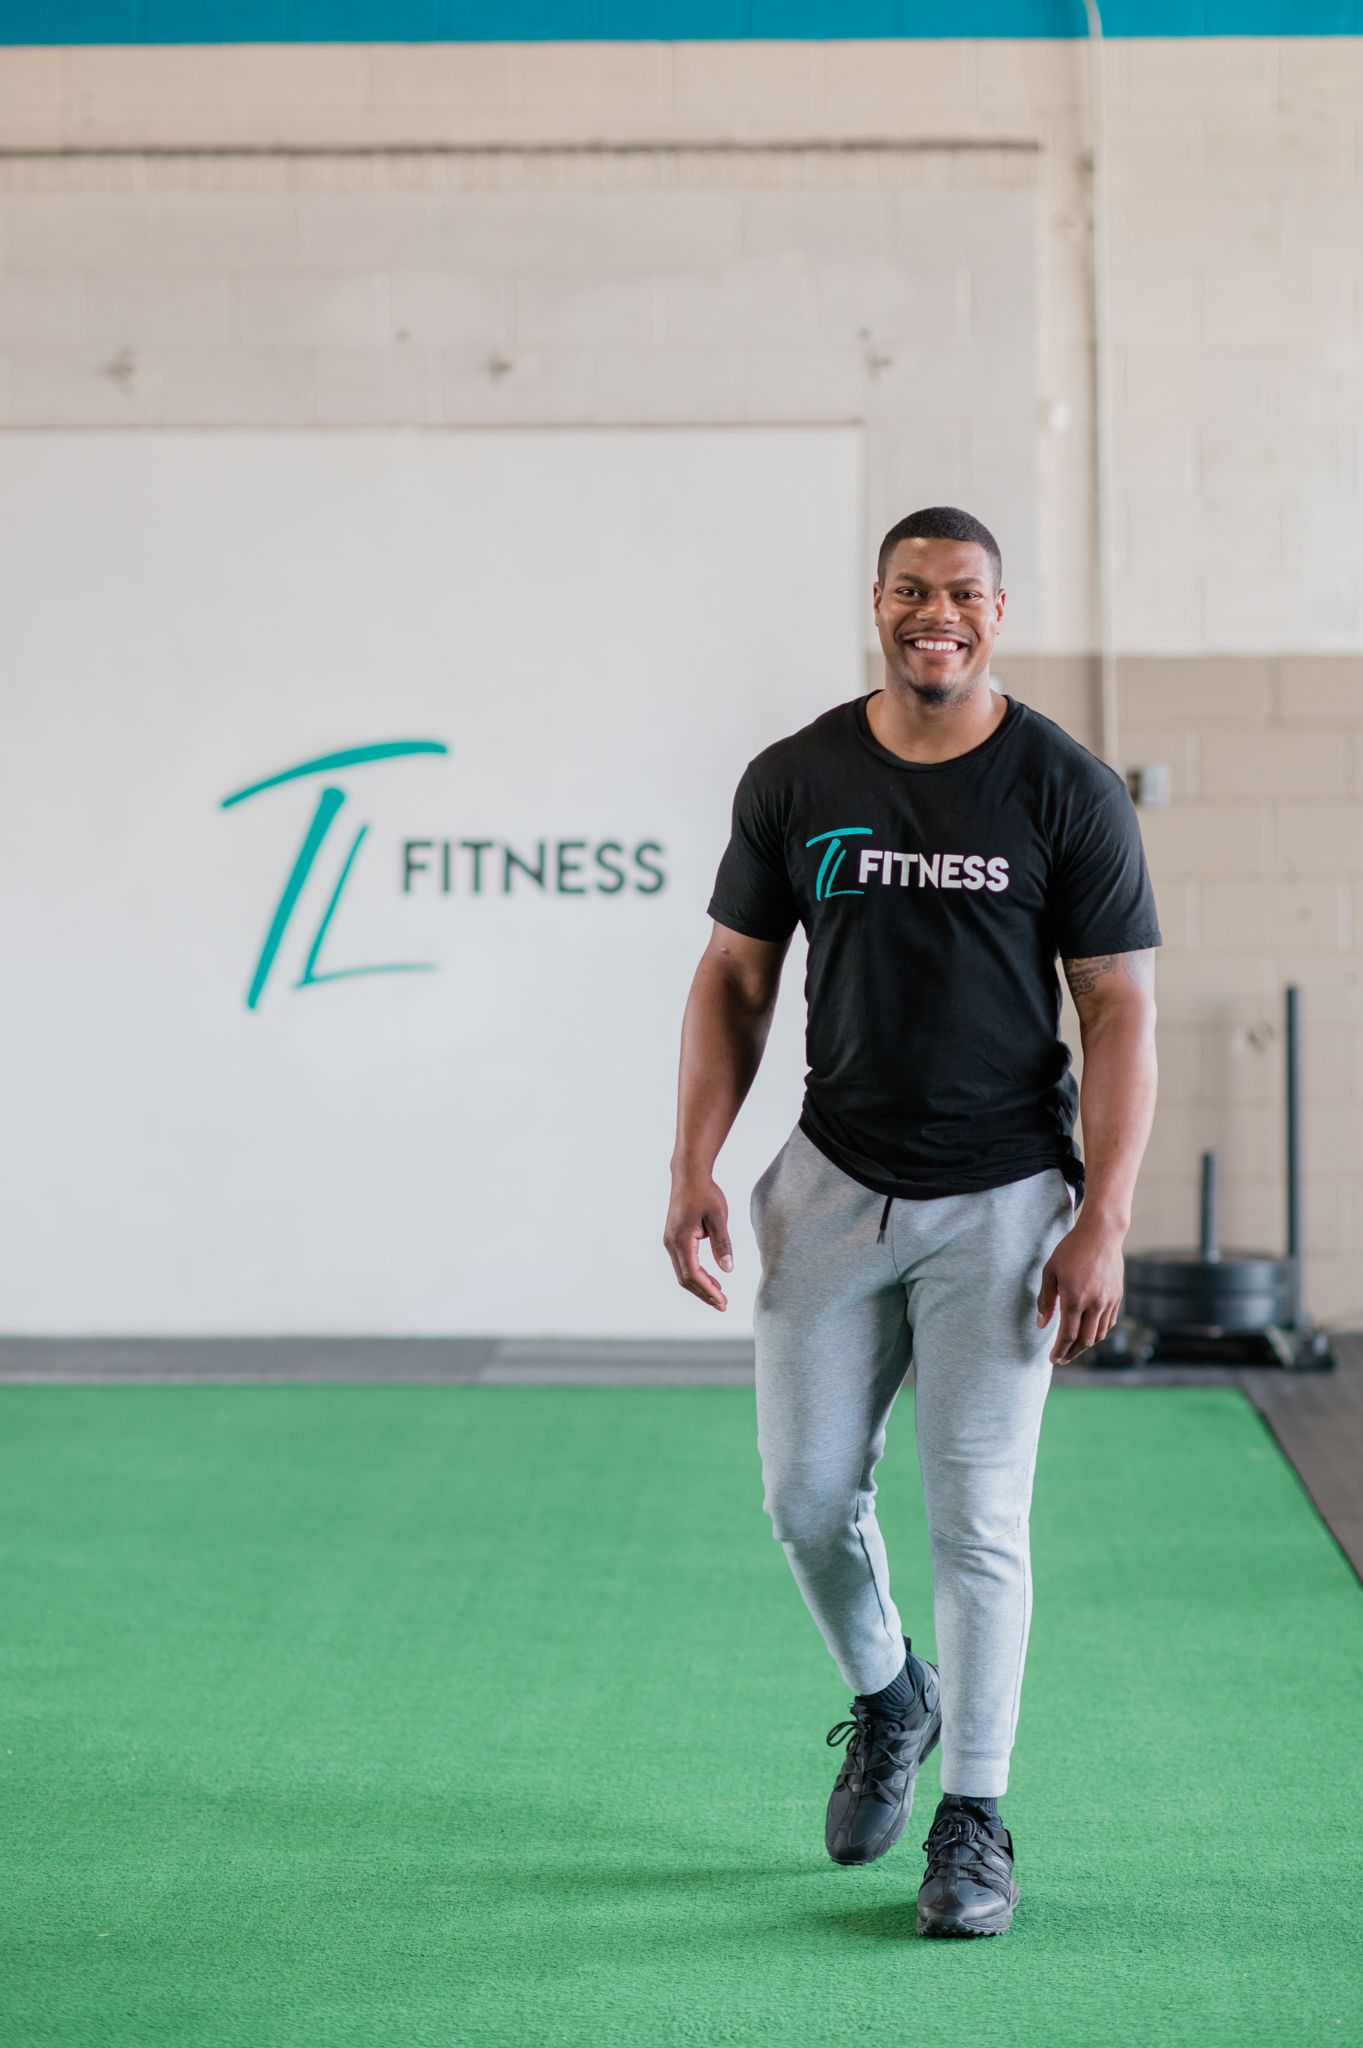 A man, Torrey Lowe, smiles and walks towards the camera. He is in a gym with "TL Fitness" written on the wall.